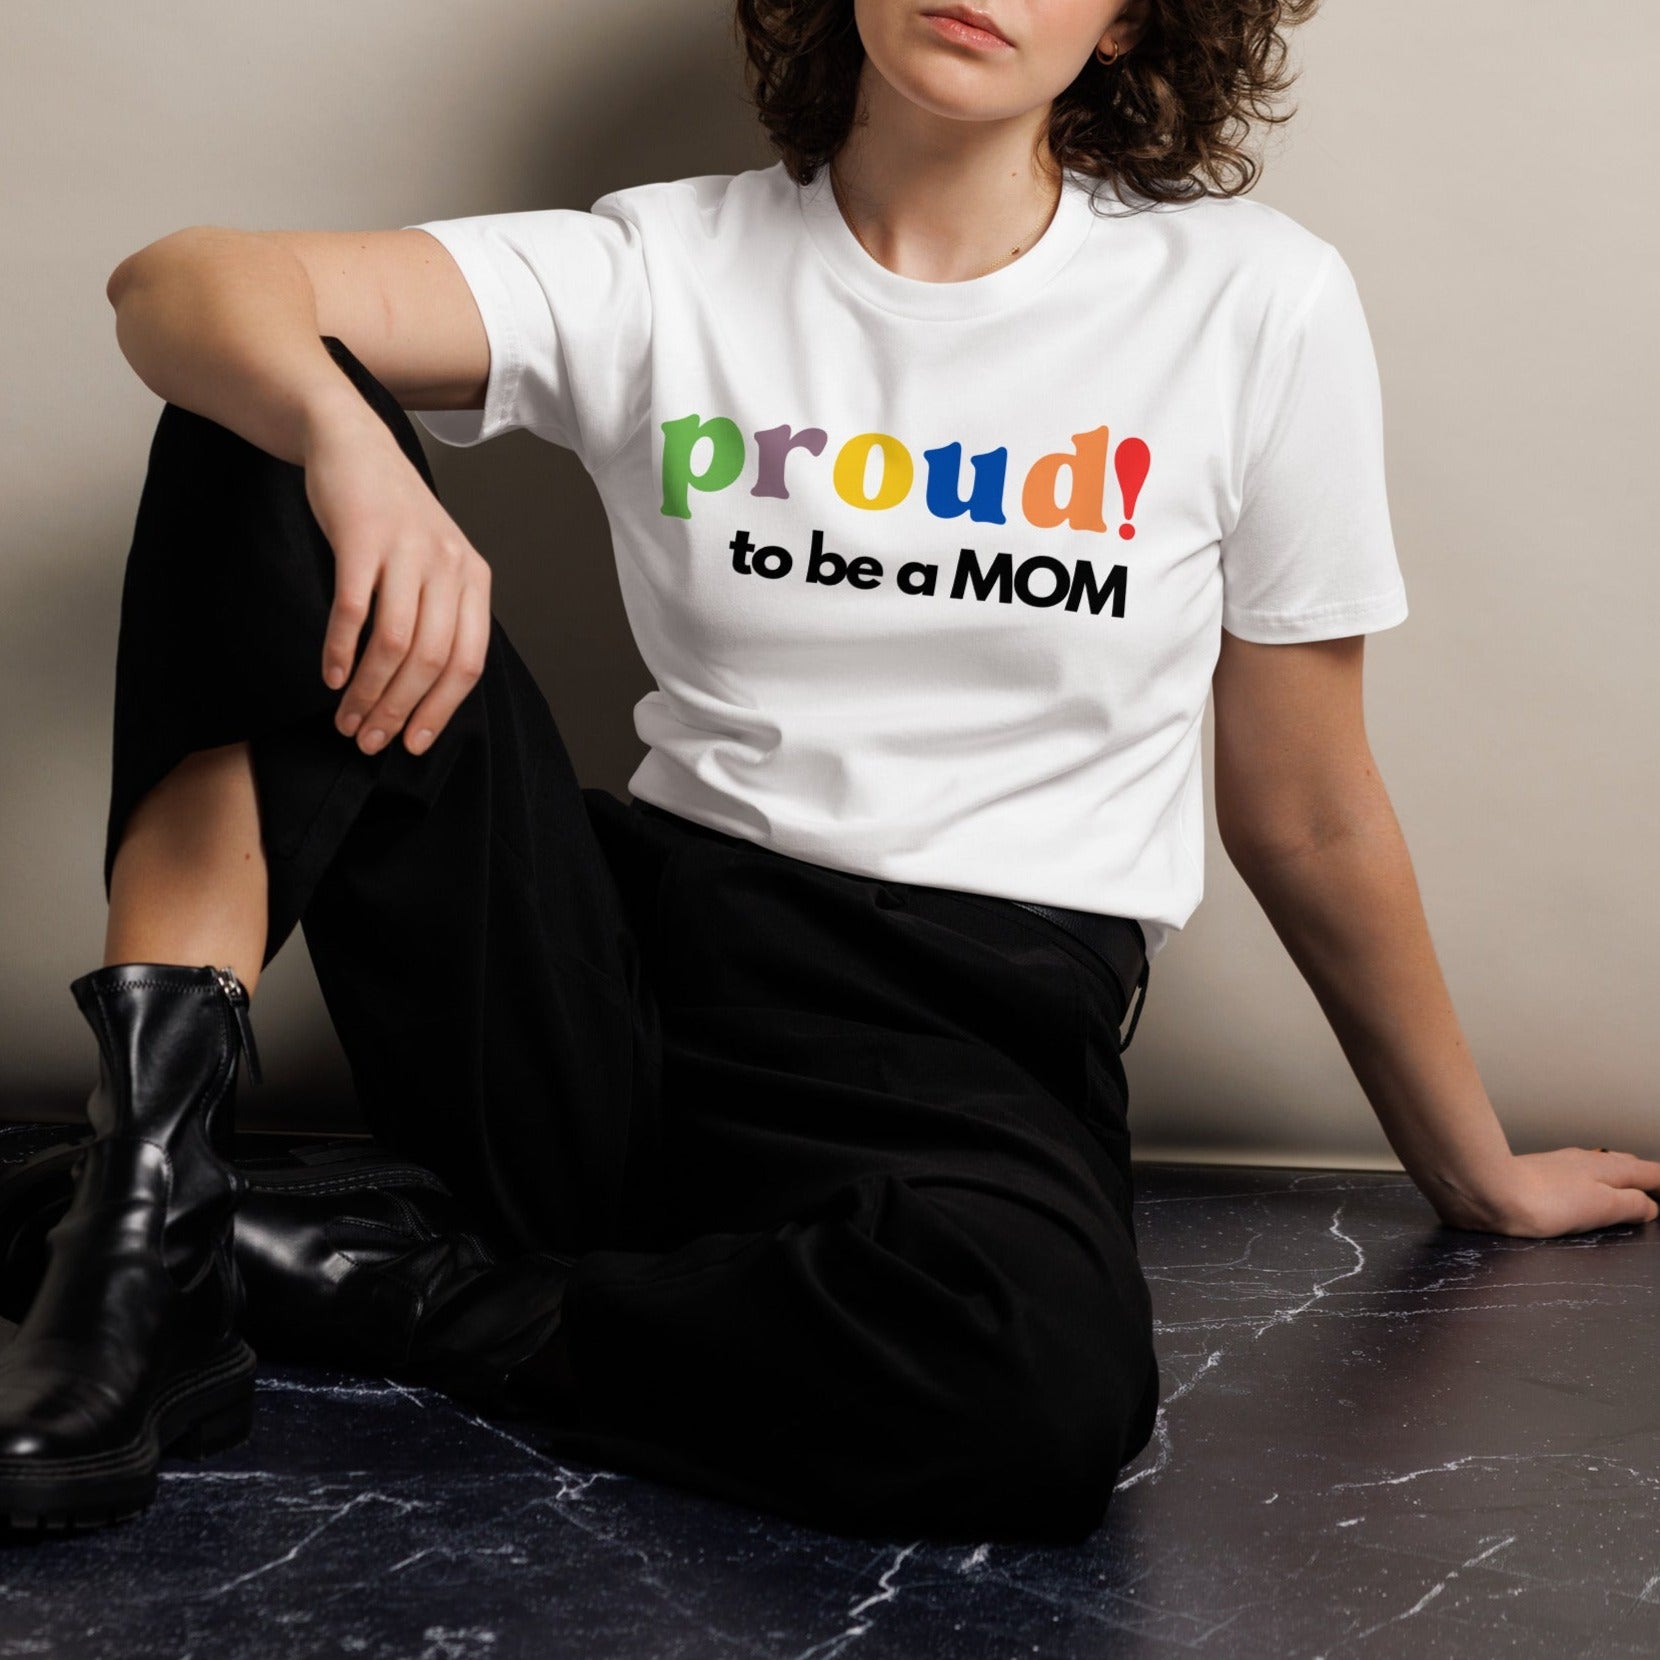 funny mom shirt, mother knows best, mothers day gift idea, unique inexpensive mother's day gifts, proud parent